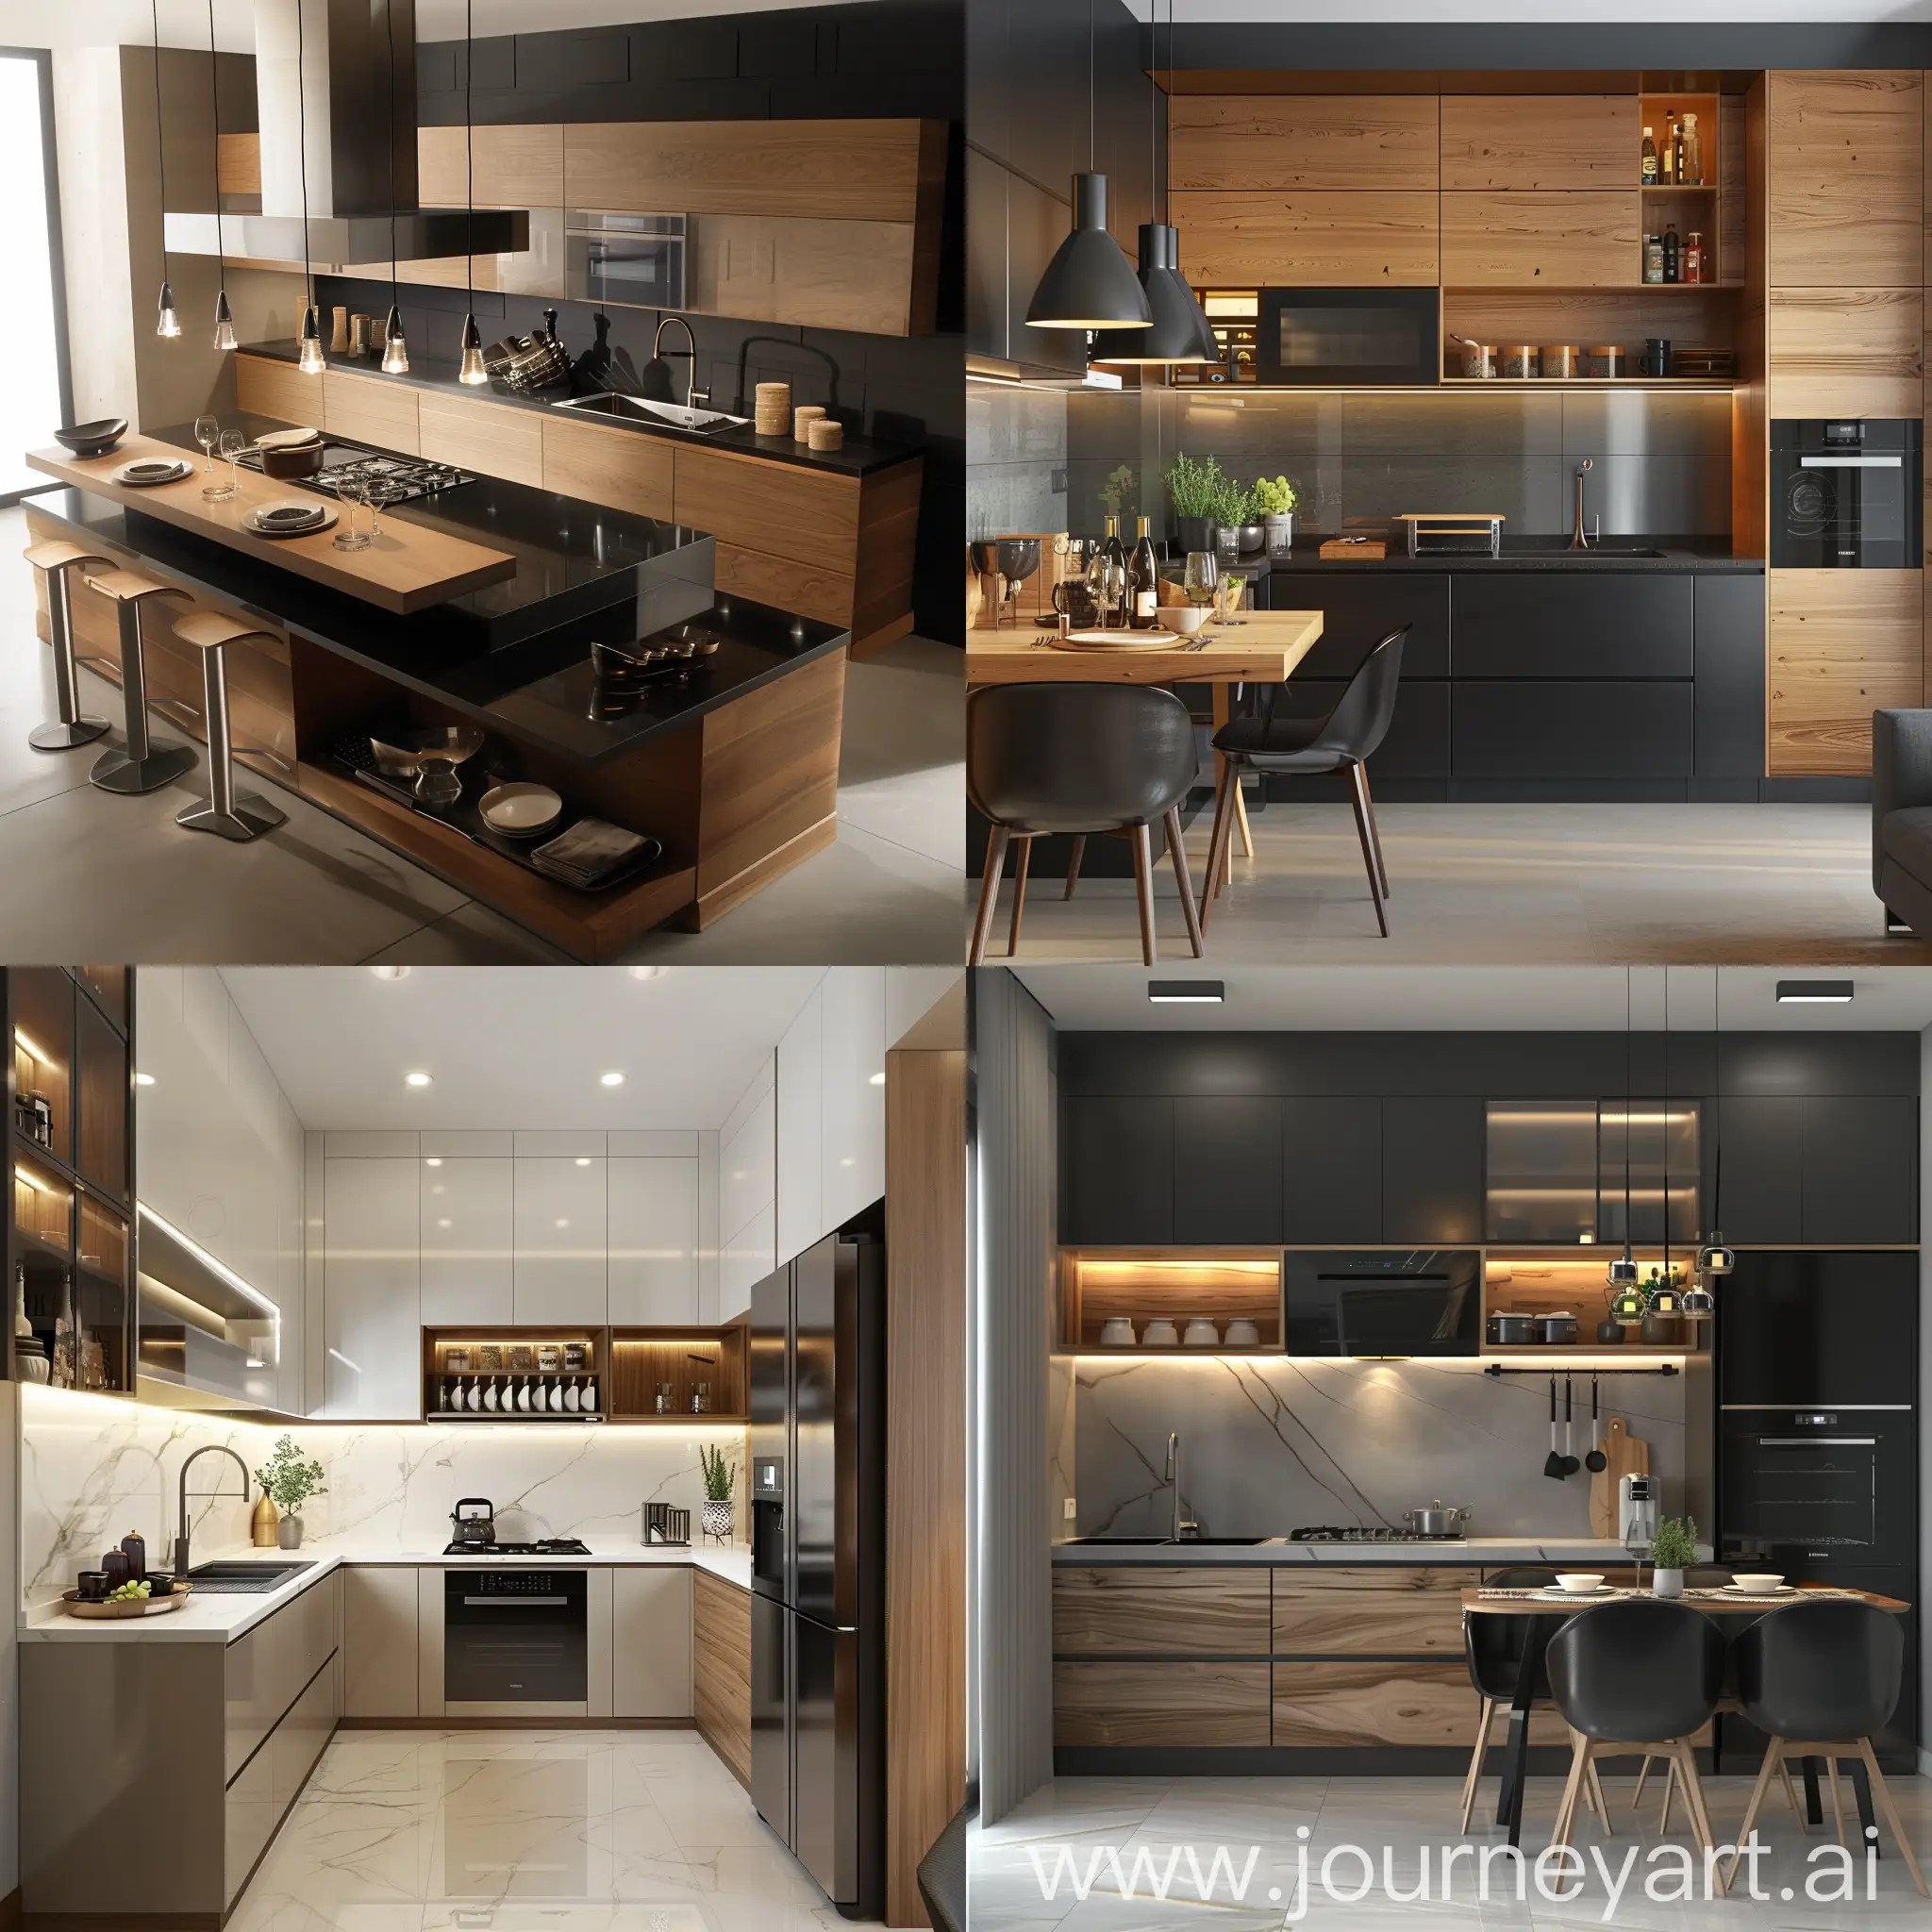 luxury modern kitchen with full set interior unique classy and subtle and little wood element elegant small in size 

